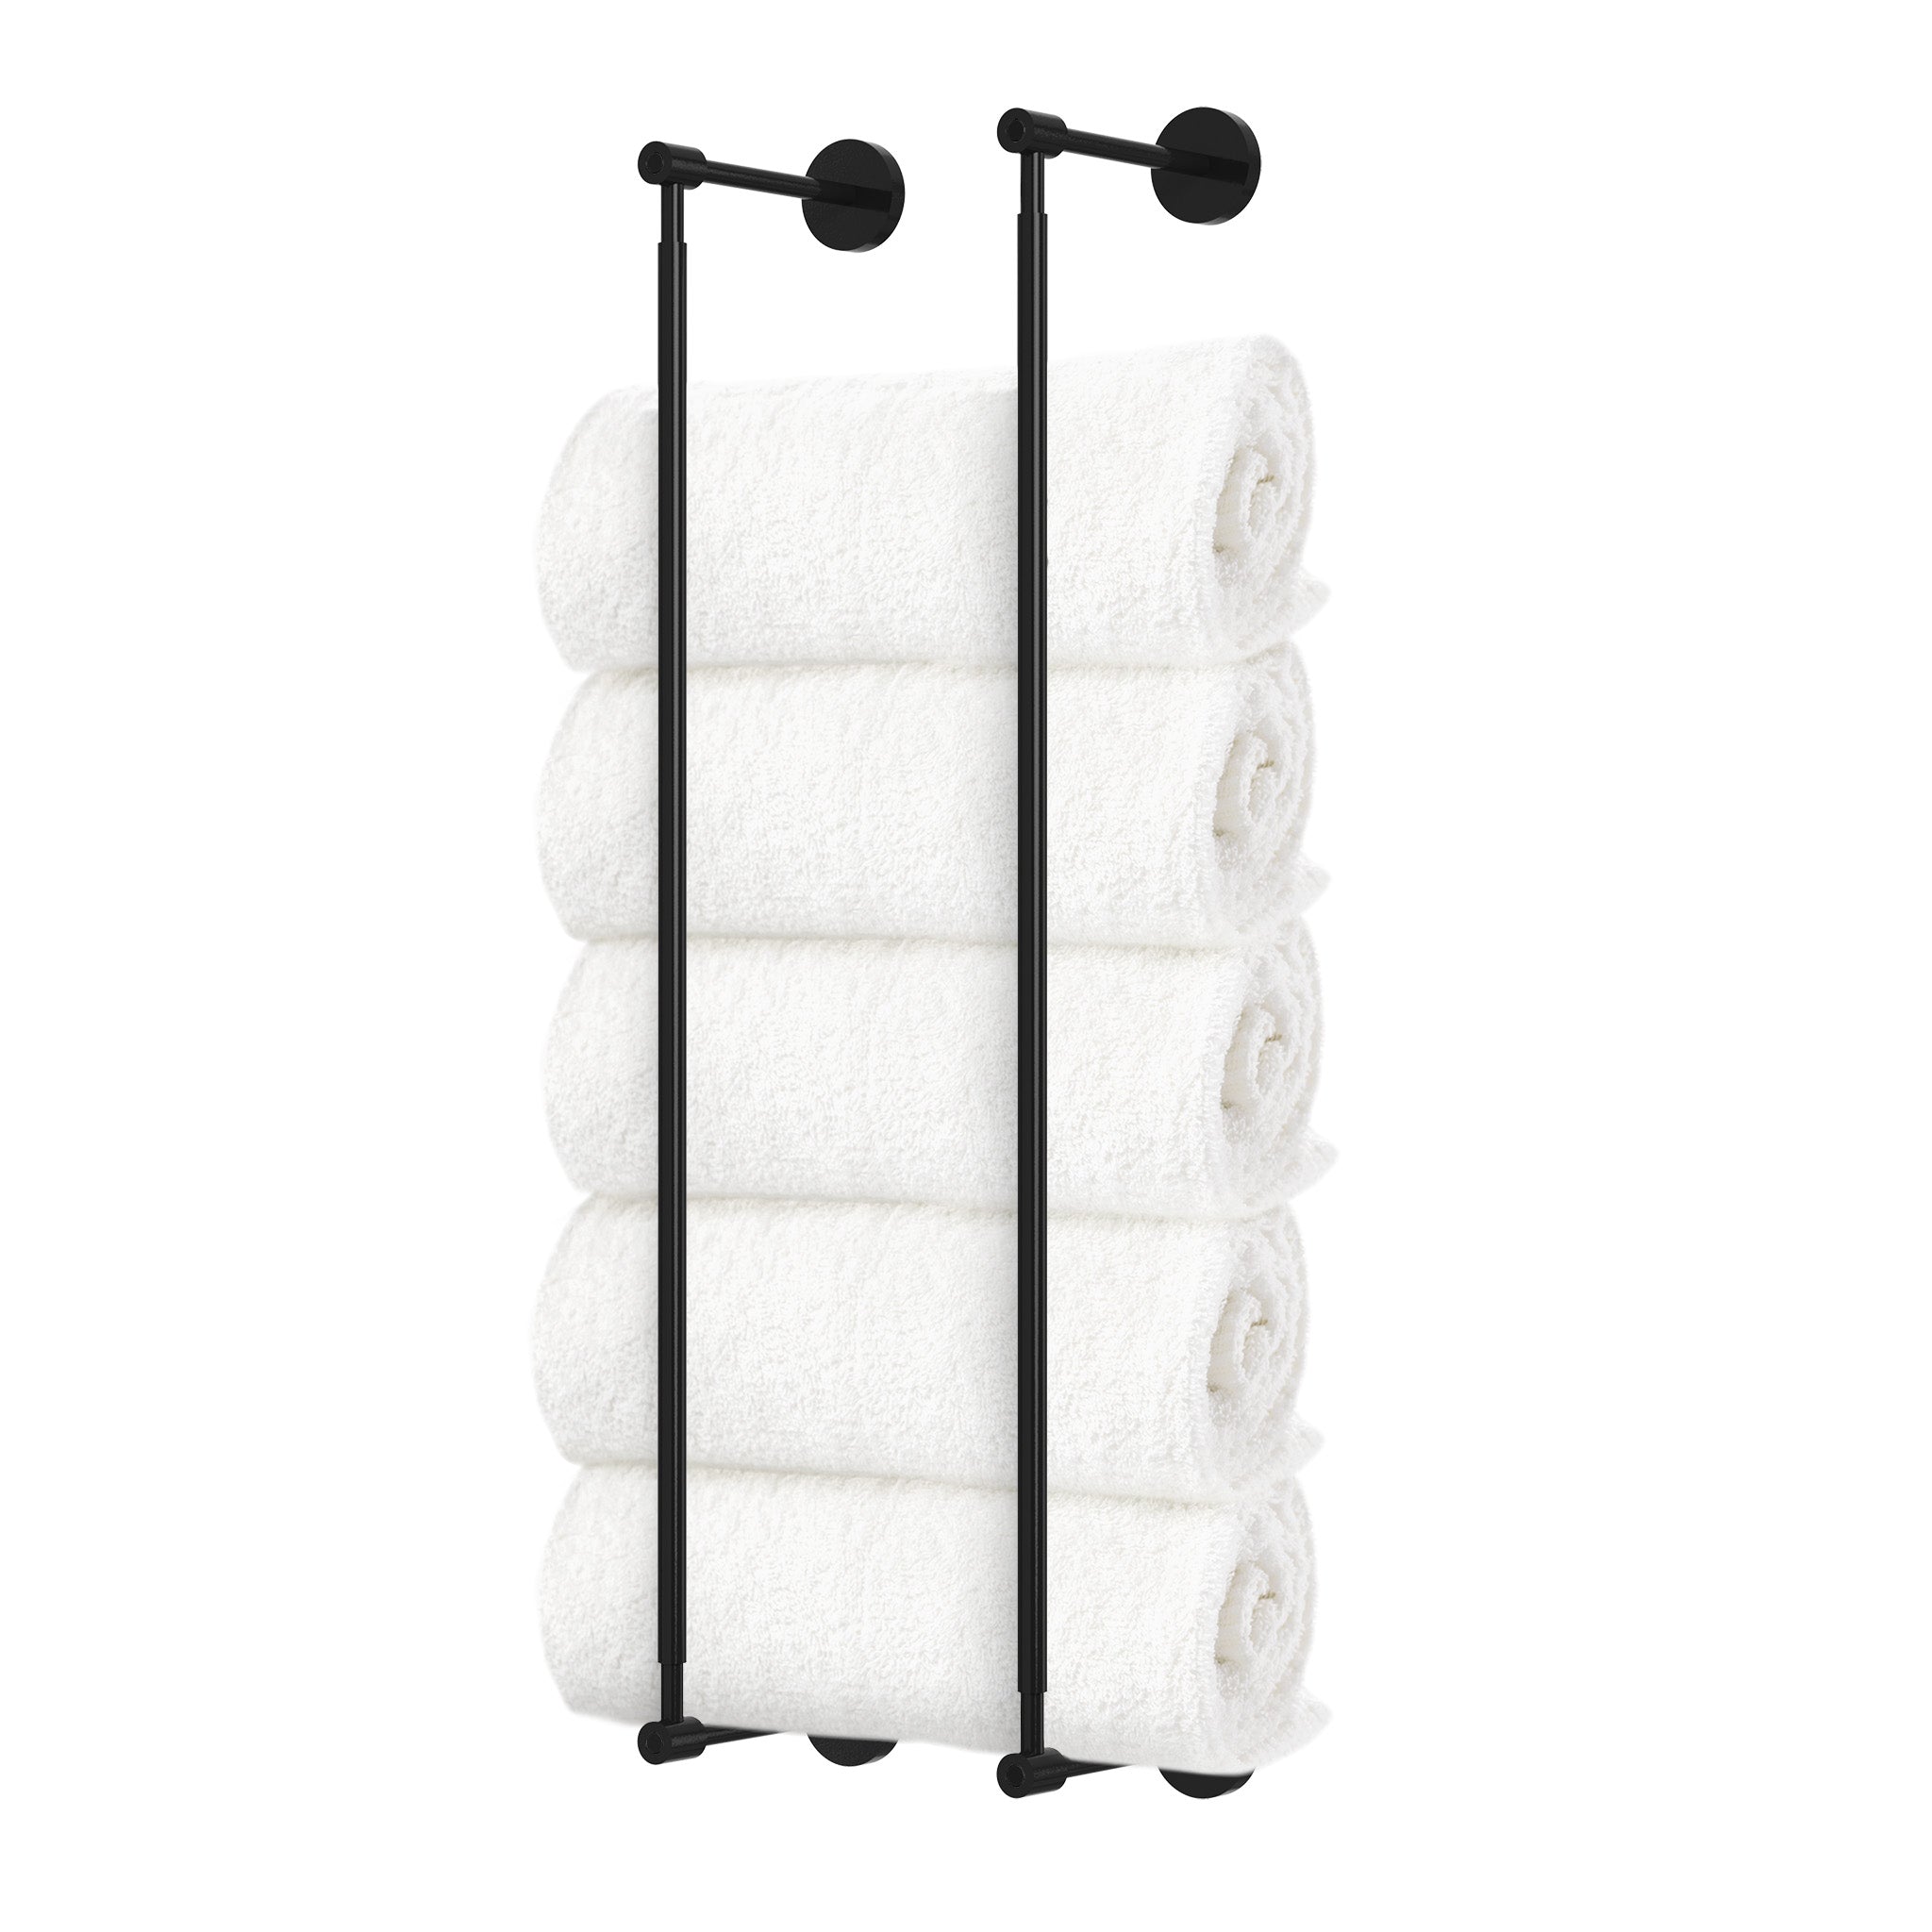 Black and black head towel rack 24 inch dutton brown hardware